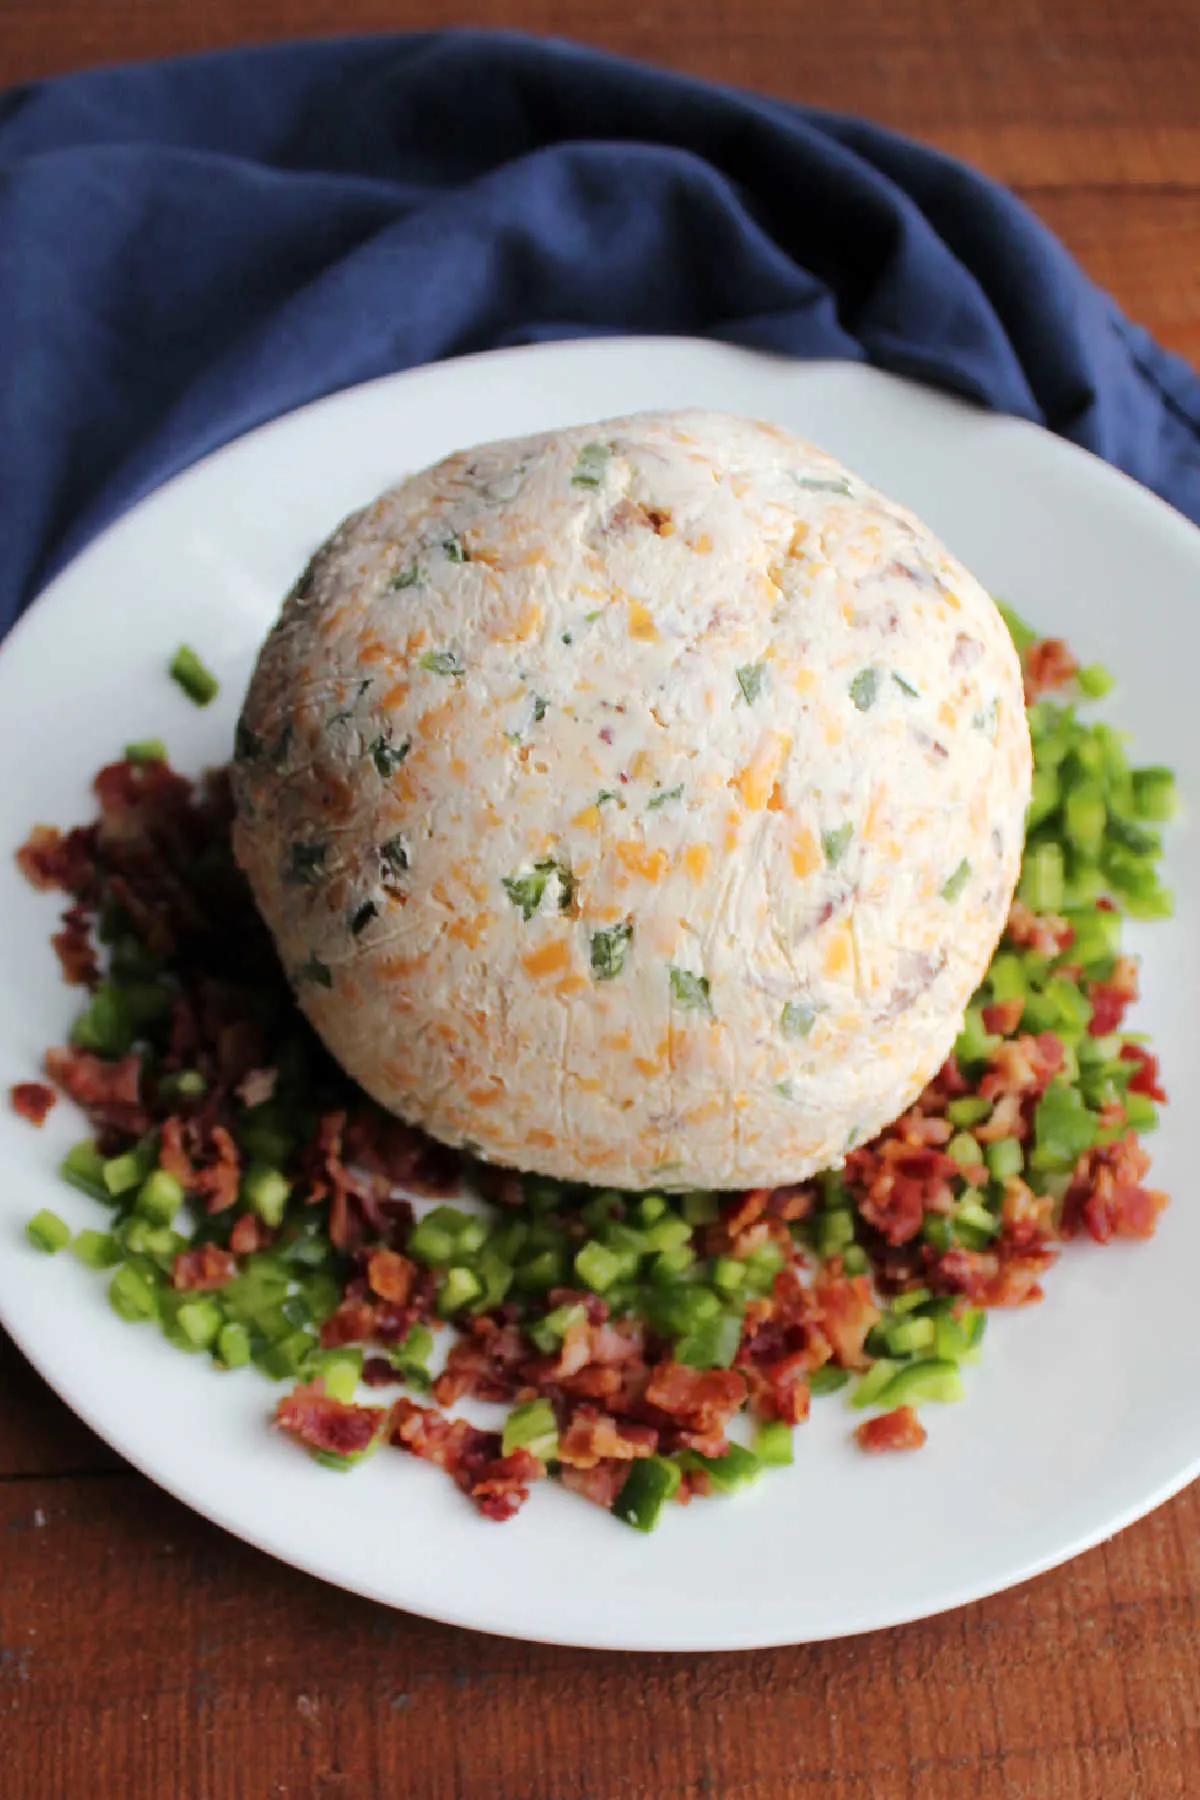 Chilled cheese ball on plate with diced jalapenos and crumbled bacon, ready to be coated and served.